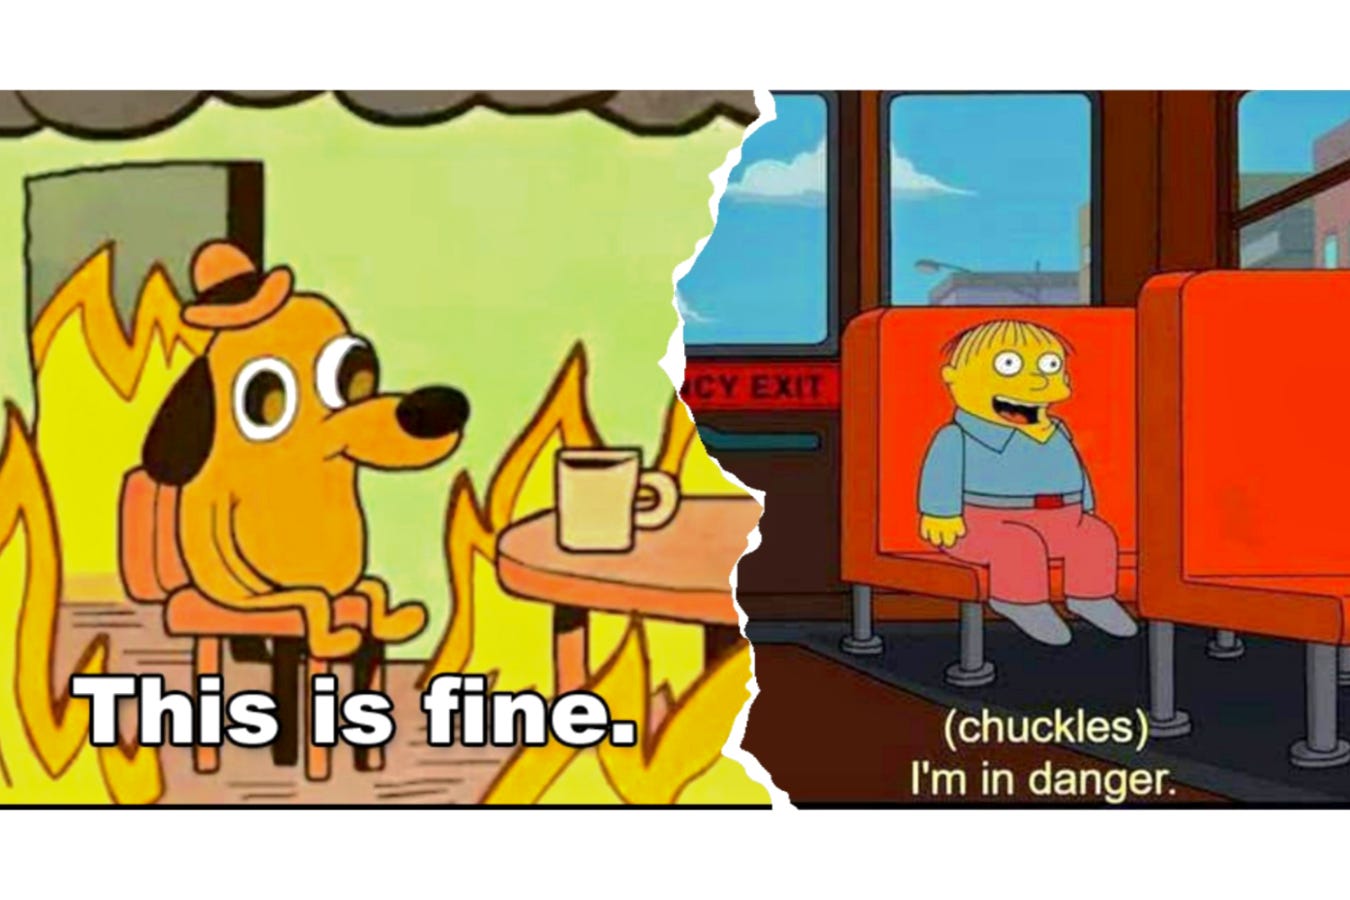 Split of 2 memes, the This is fine dog in the burning room and also the kid from the Simpsons sitting on the bus alone with caption Chuckles I'm in danger